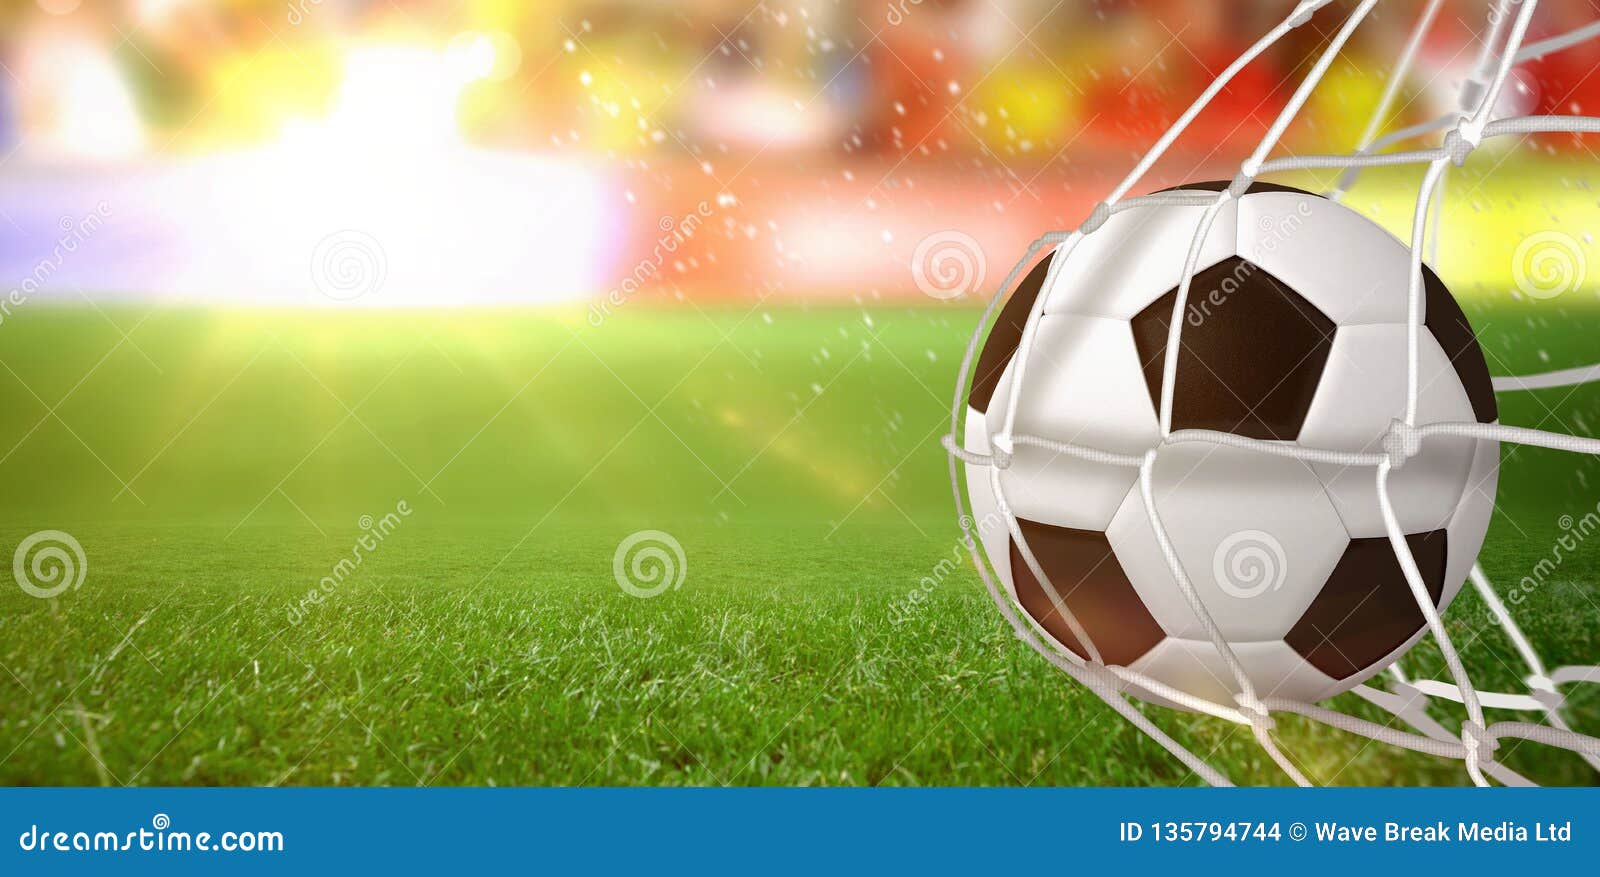 Composite Image of Soccer Ball in Goal Net Stock Photo - Image of ...